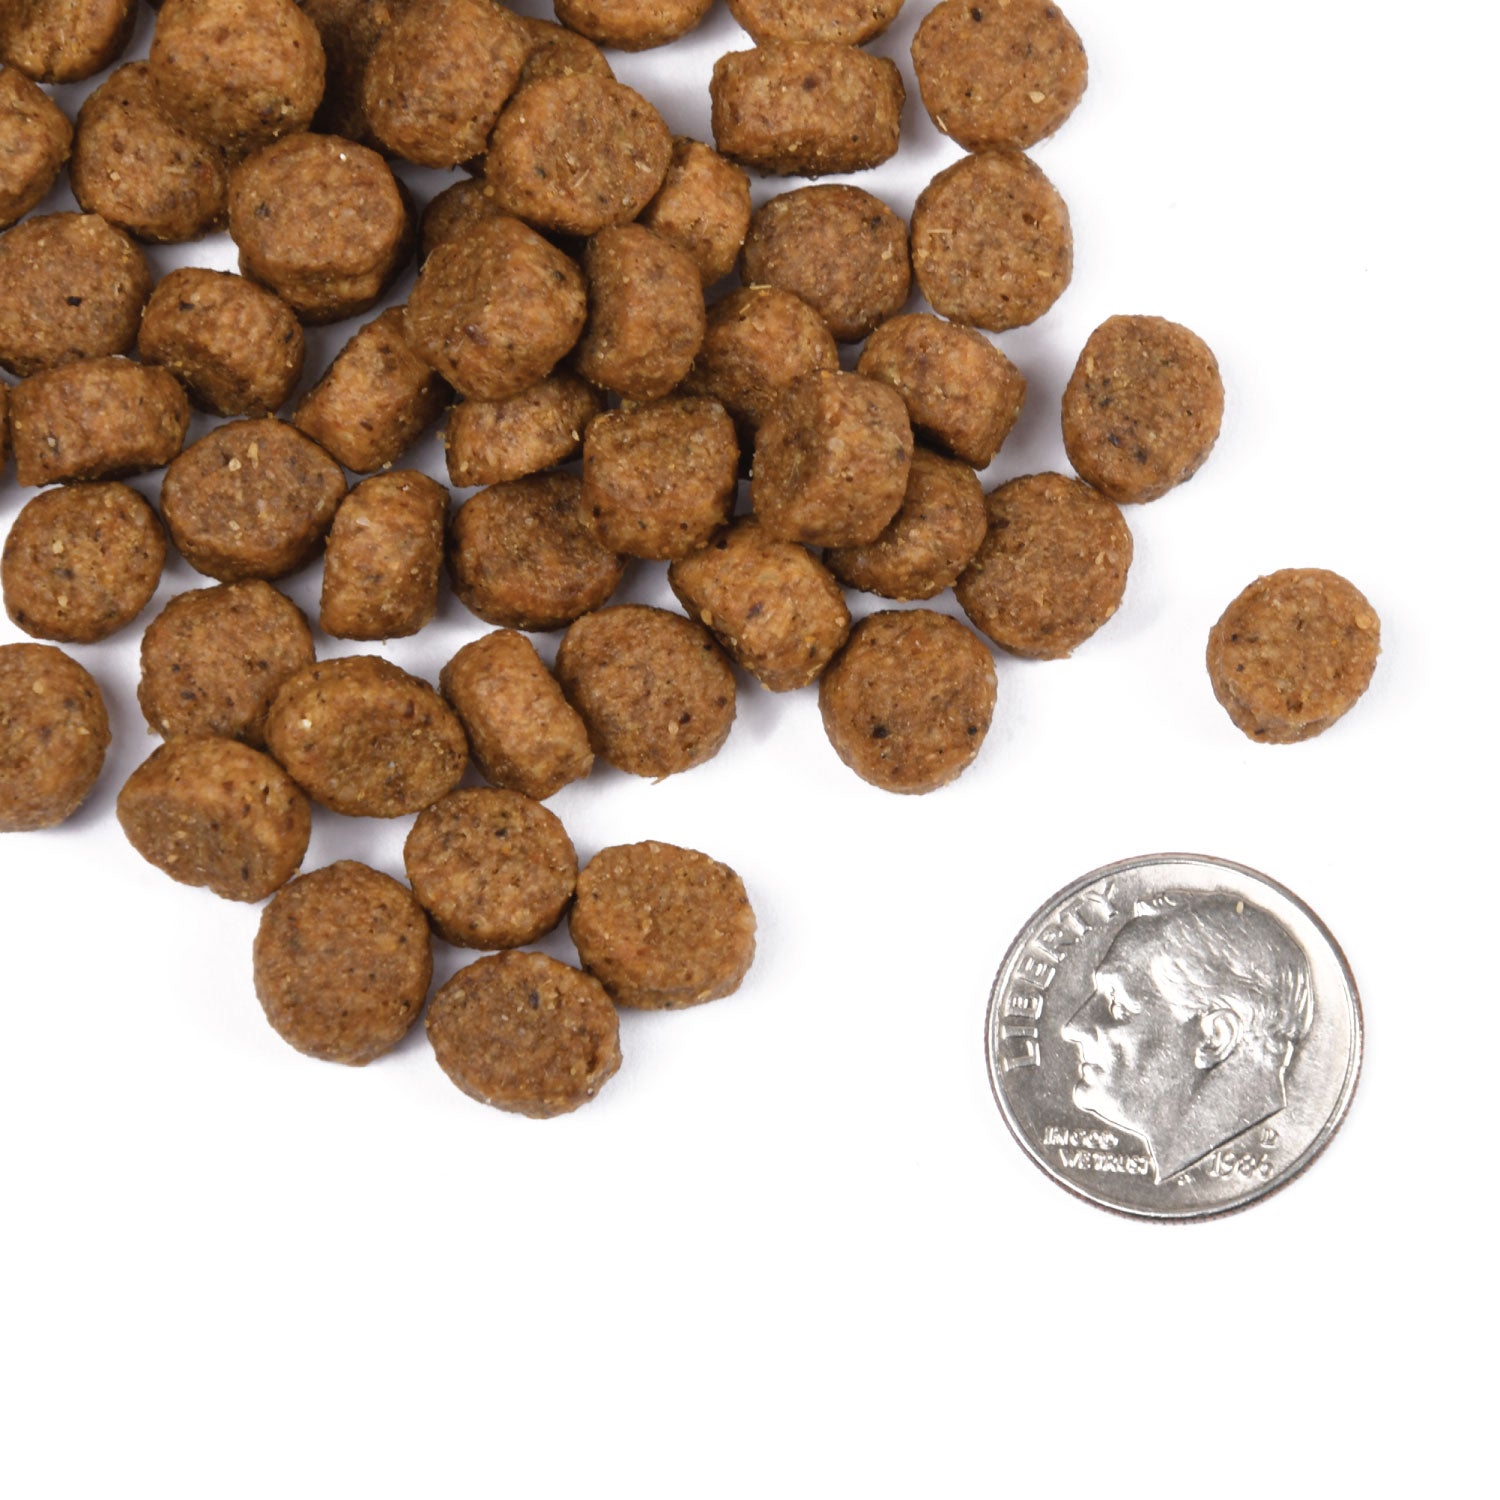 Fromm Dry Dog Food Classic Puppy